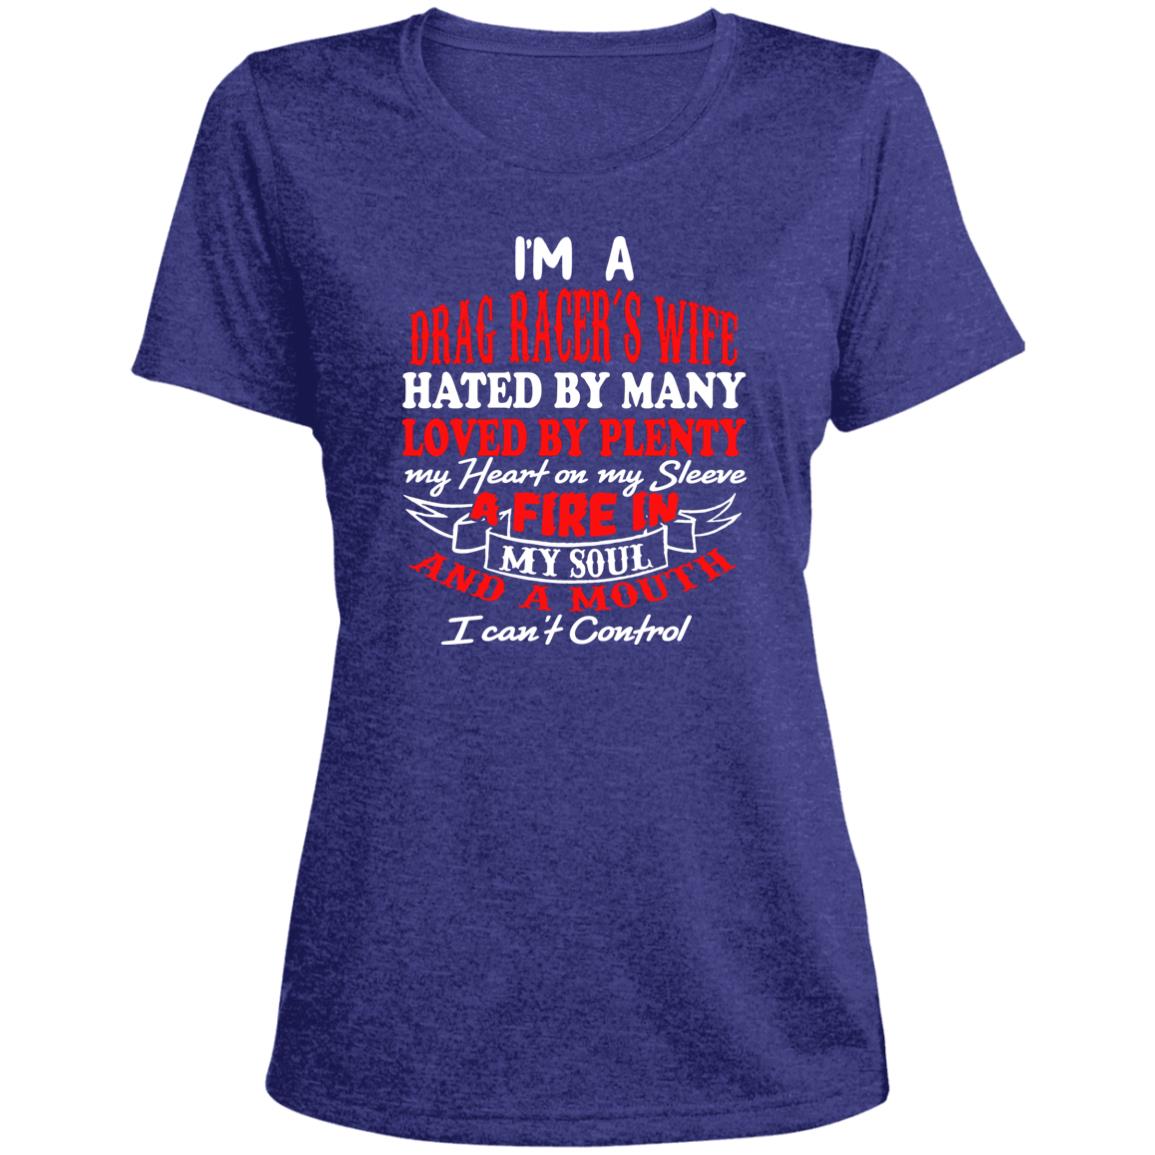 I'm A Drag Racer's Wife Hated By Many Loved By Plenty Ladies' Heather Scoop Neck Performance Tee